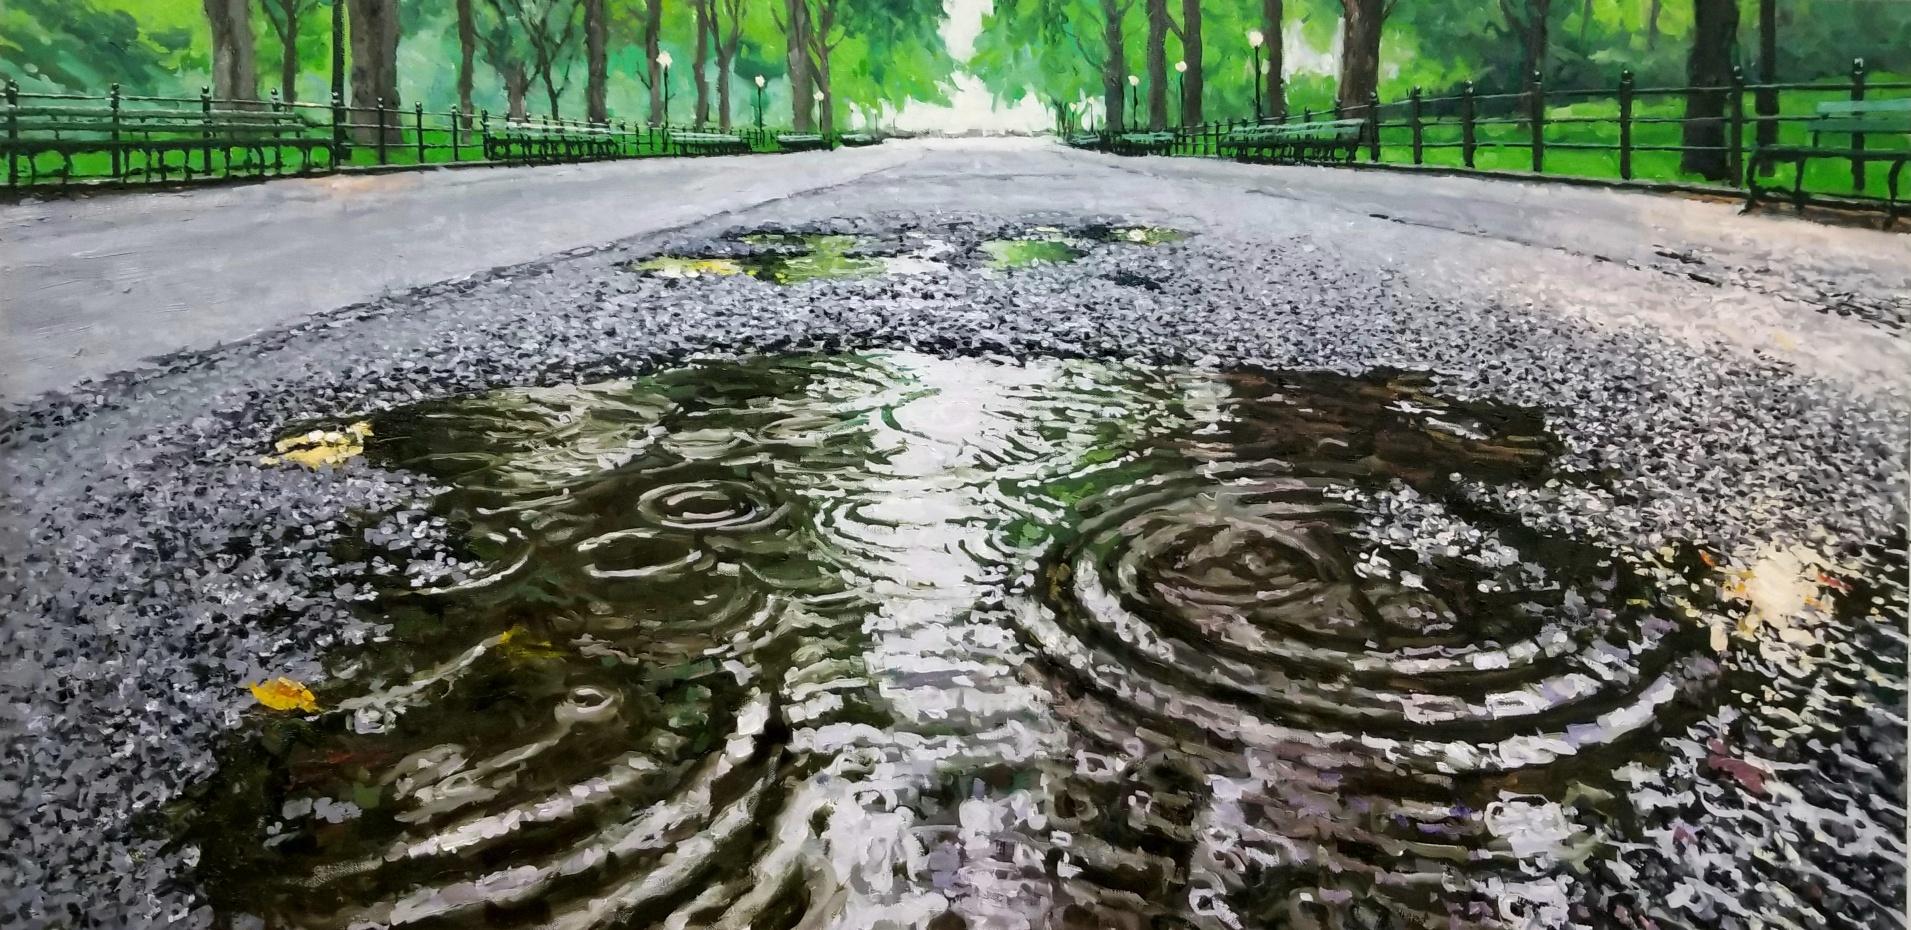 Richard Combes Landscape Painting - MORNING RAINFALL CENTRAL PARK - Landscape / Contemporary Realism / Water